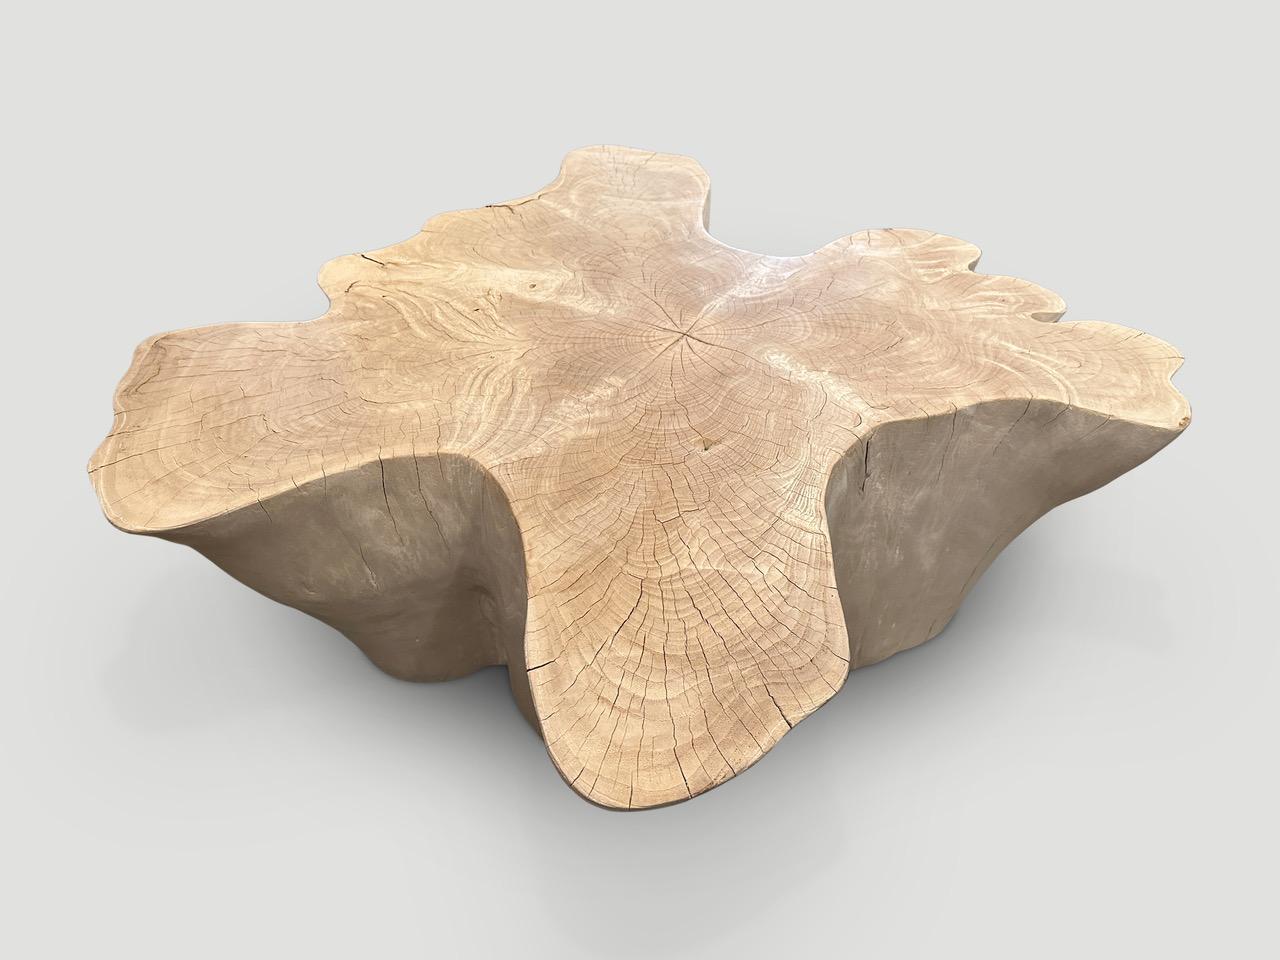 Impressive reclaimed bleached teak amorphous coffee table. A slight graduation from the bottom to the top. We have added a polish to the top for a slight bone contrast and protection. 

The St. Barts Collection features an exciting line of organic